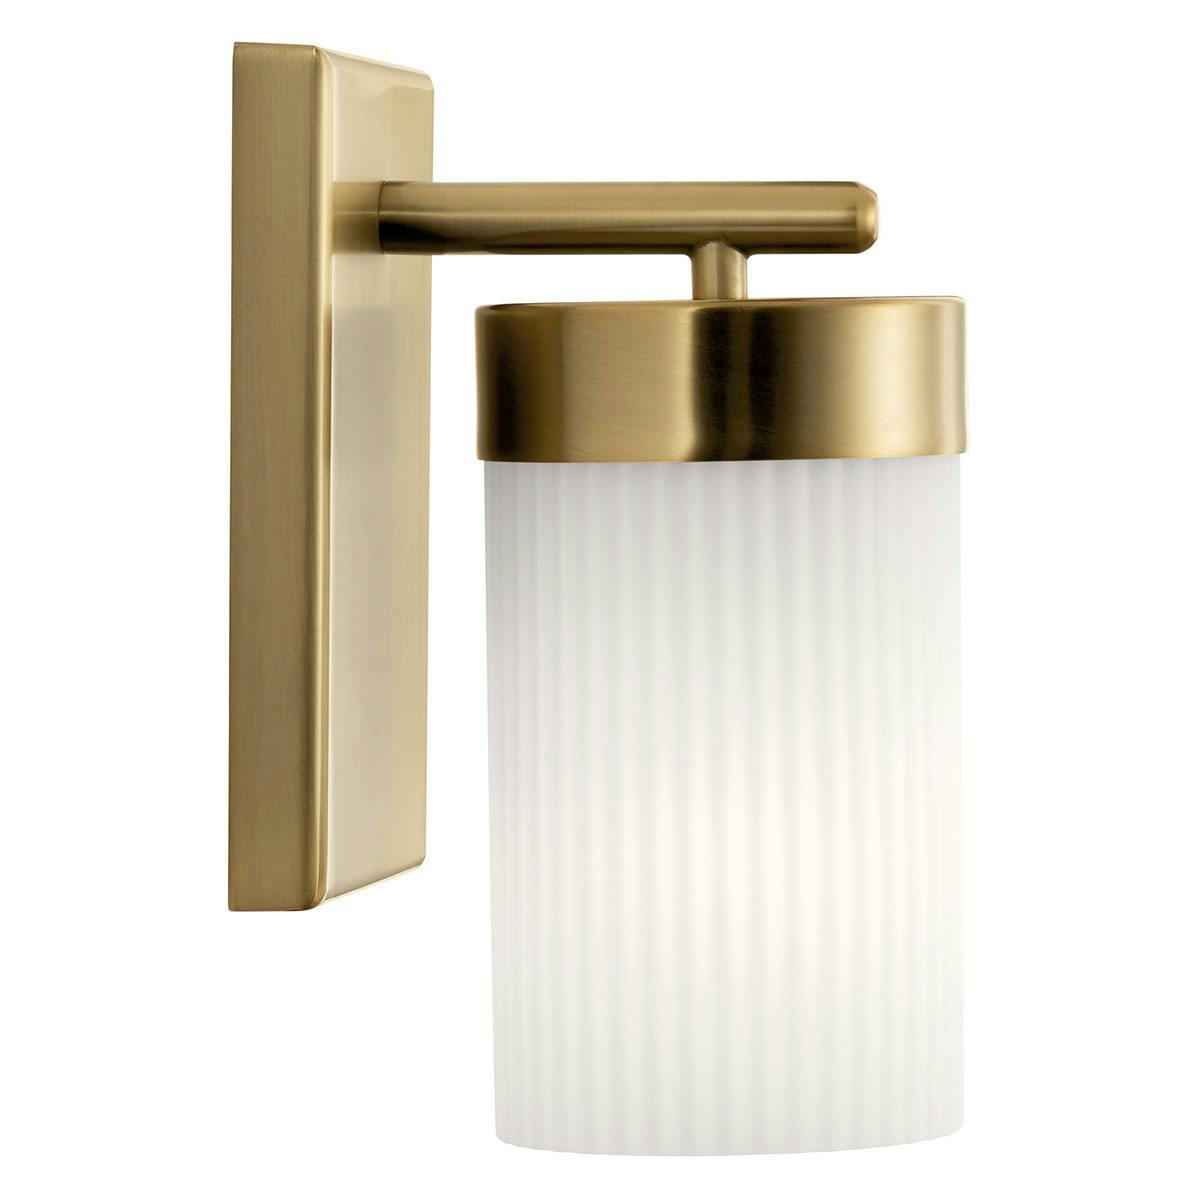 Profile view of the Ciona 9" 1 Light Sconce in Brass on a white background